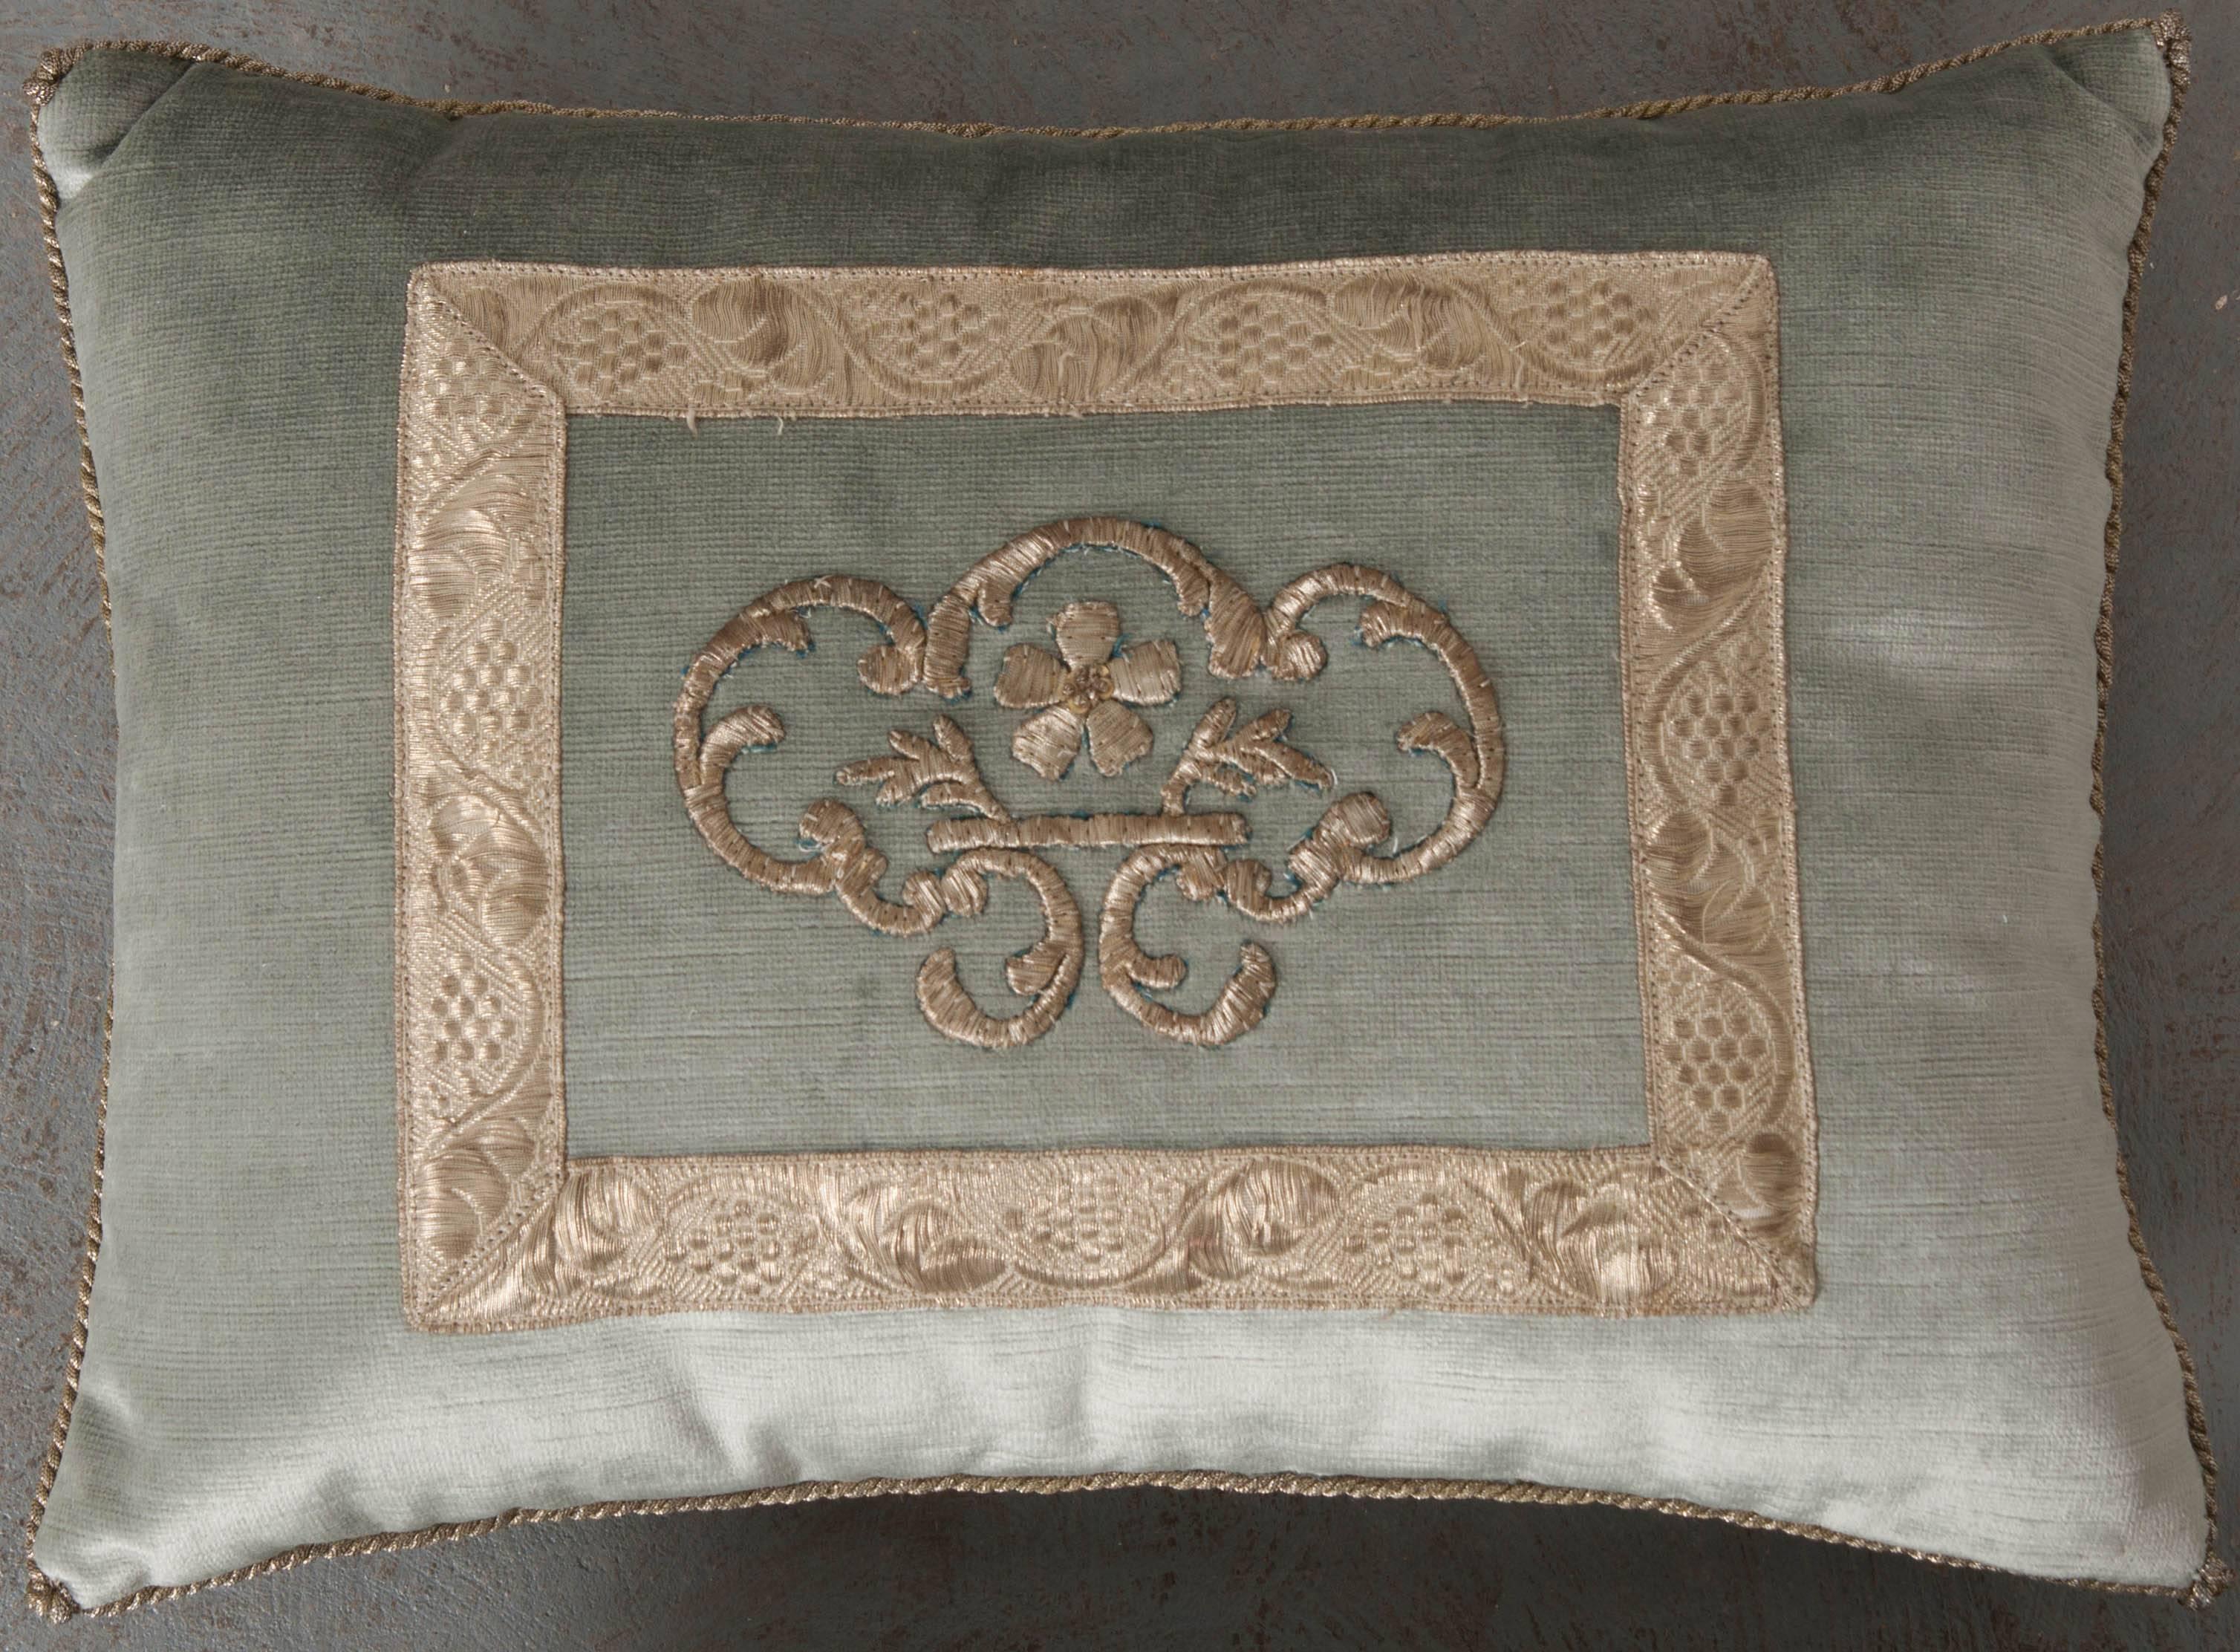 Antique Ottoman Empire raised silver metallic embroidery, framed with antique silver metallic galon on pale French blue velvet. Hand-trimmed with vintage silver metallic cording. Knotted in the corners. Available for individual purchase: $835.00